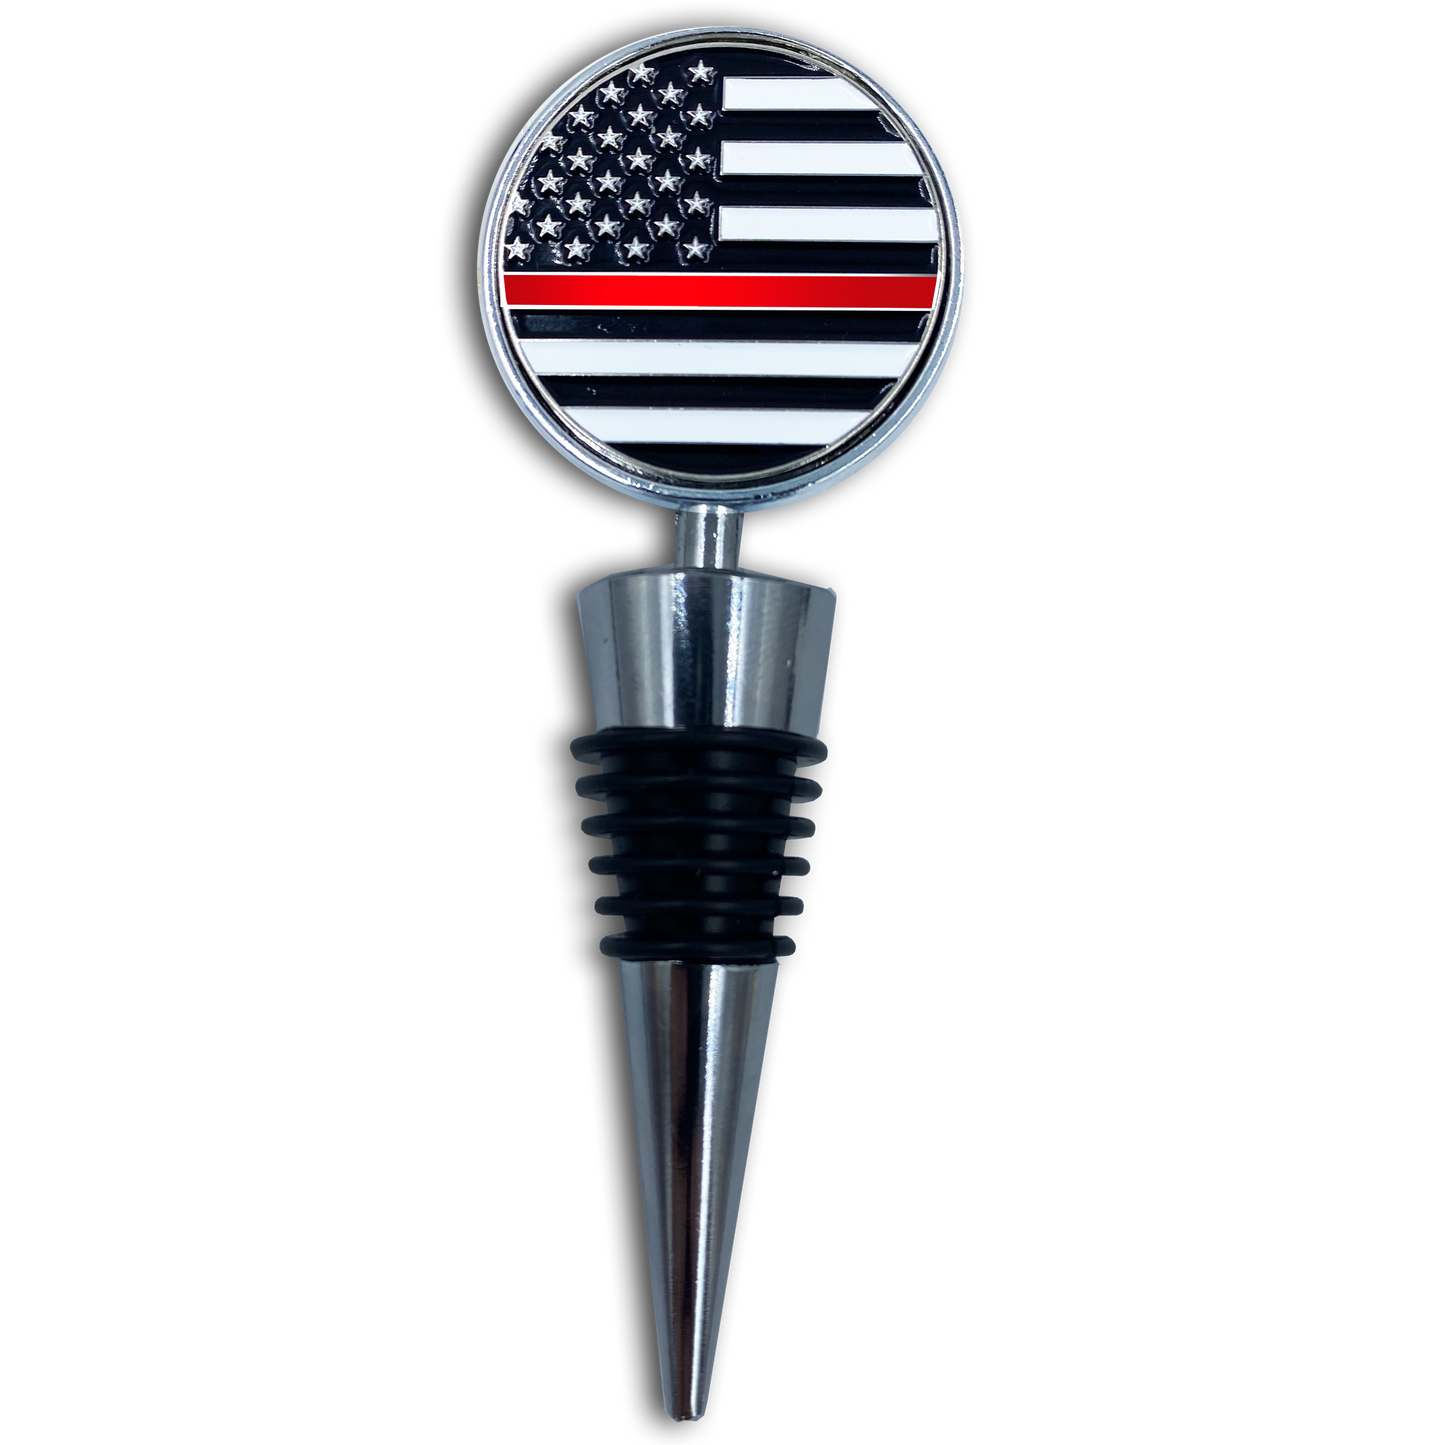 DL1-18 Thin Red Line Fire Department American Flag Wine Bottle Stopper Challenge Coin Fire Fighter Rescue